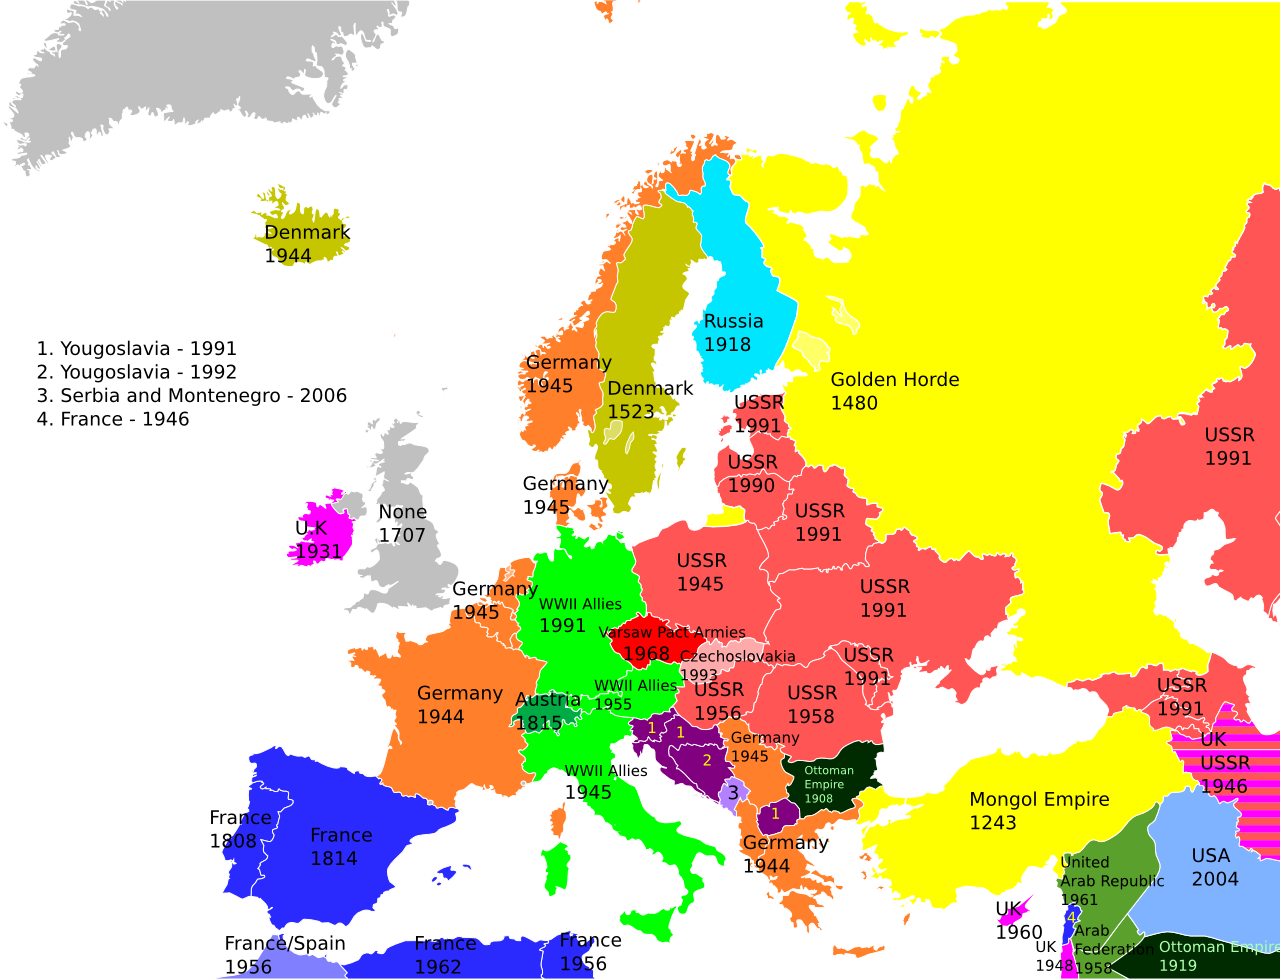 Maps Of Europe